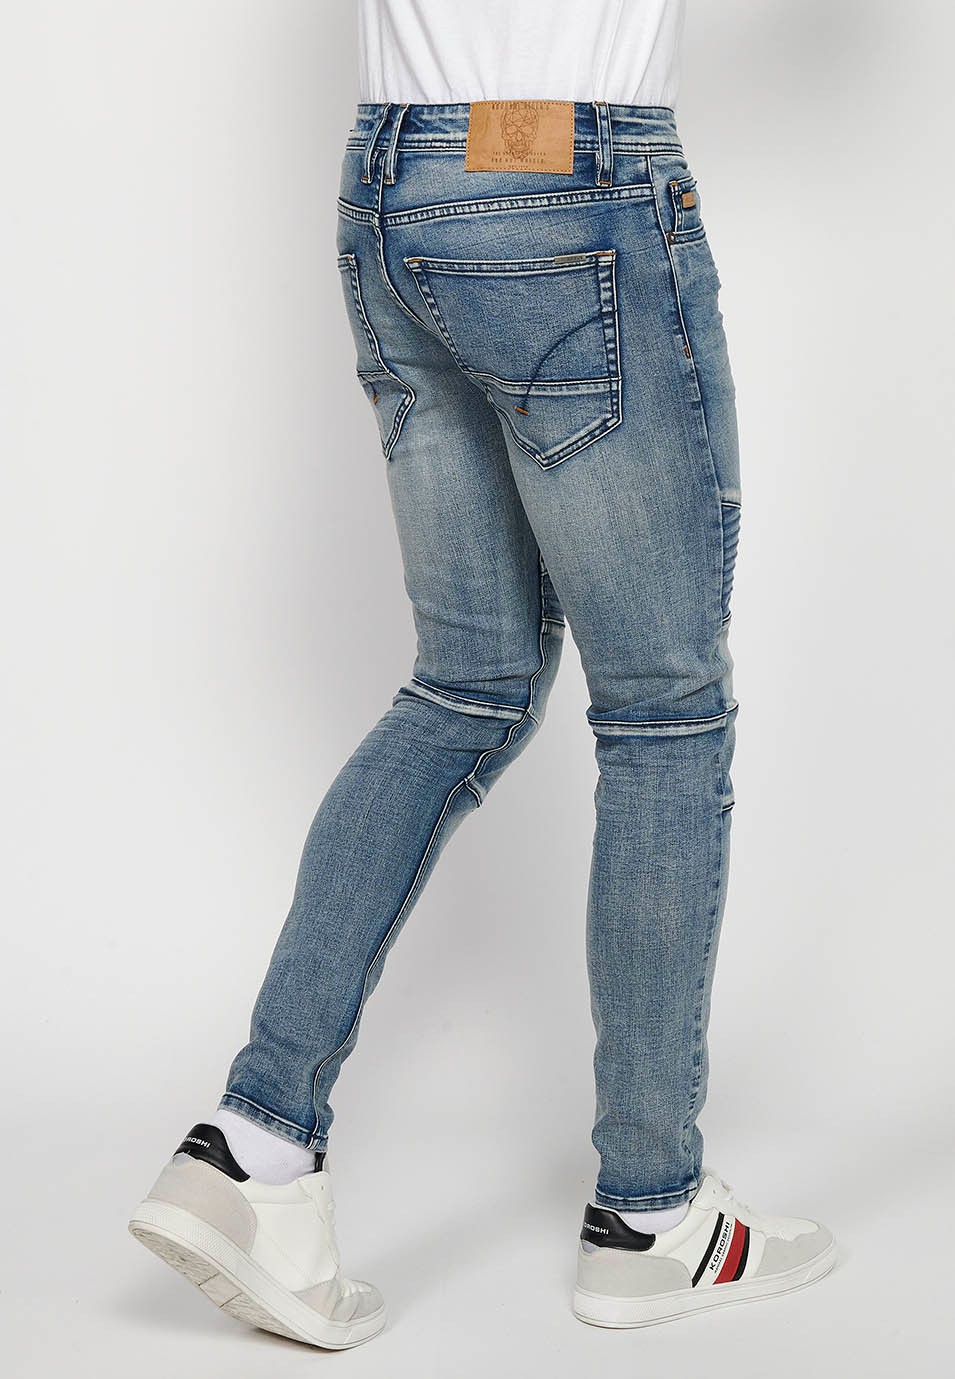 Long skinny fit biker jeans with front zipper and button closure and cut details on the knees in Blue for Men 5